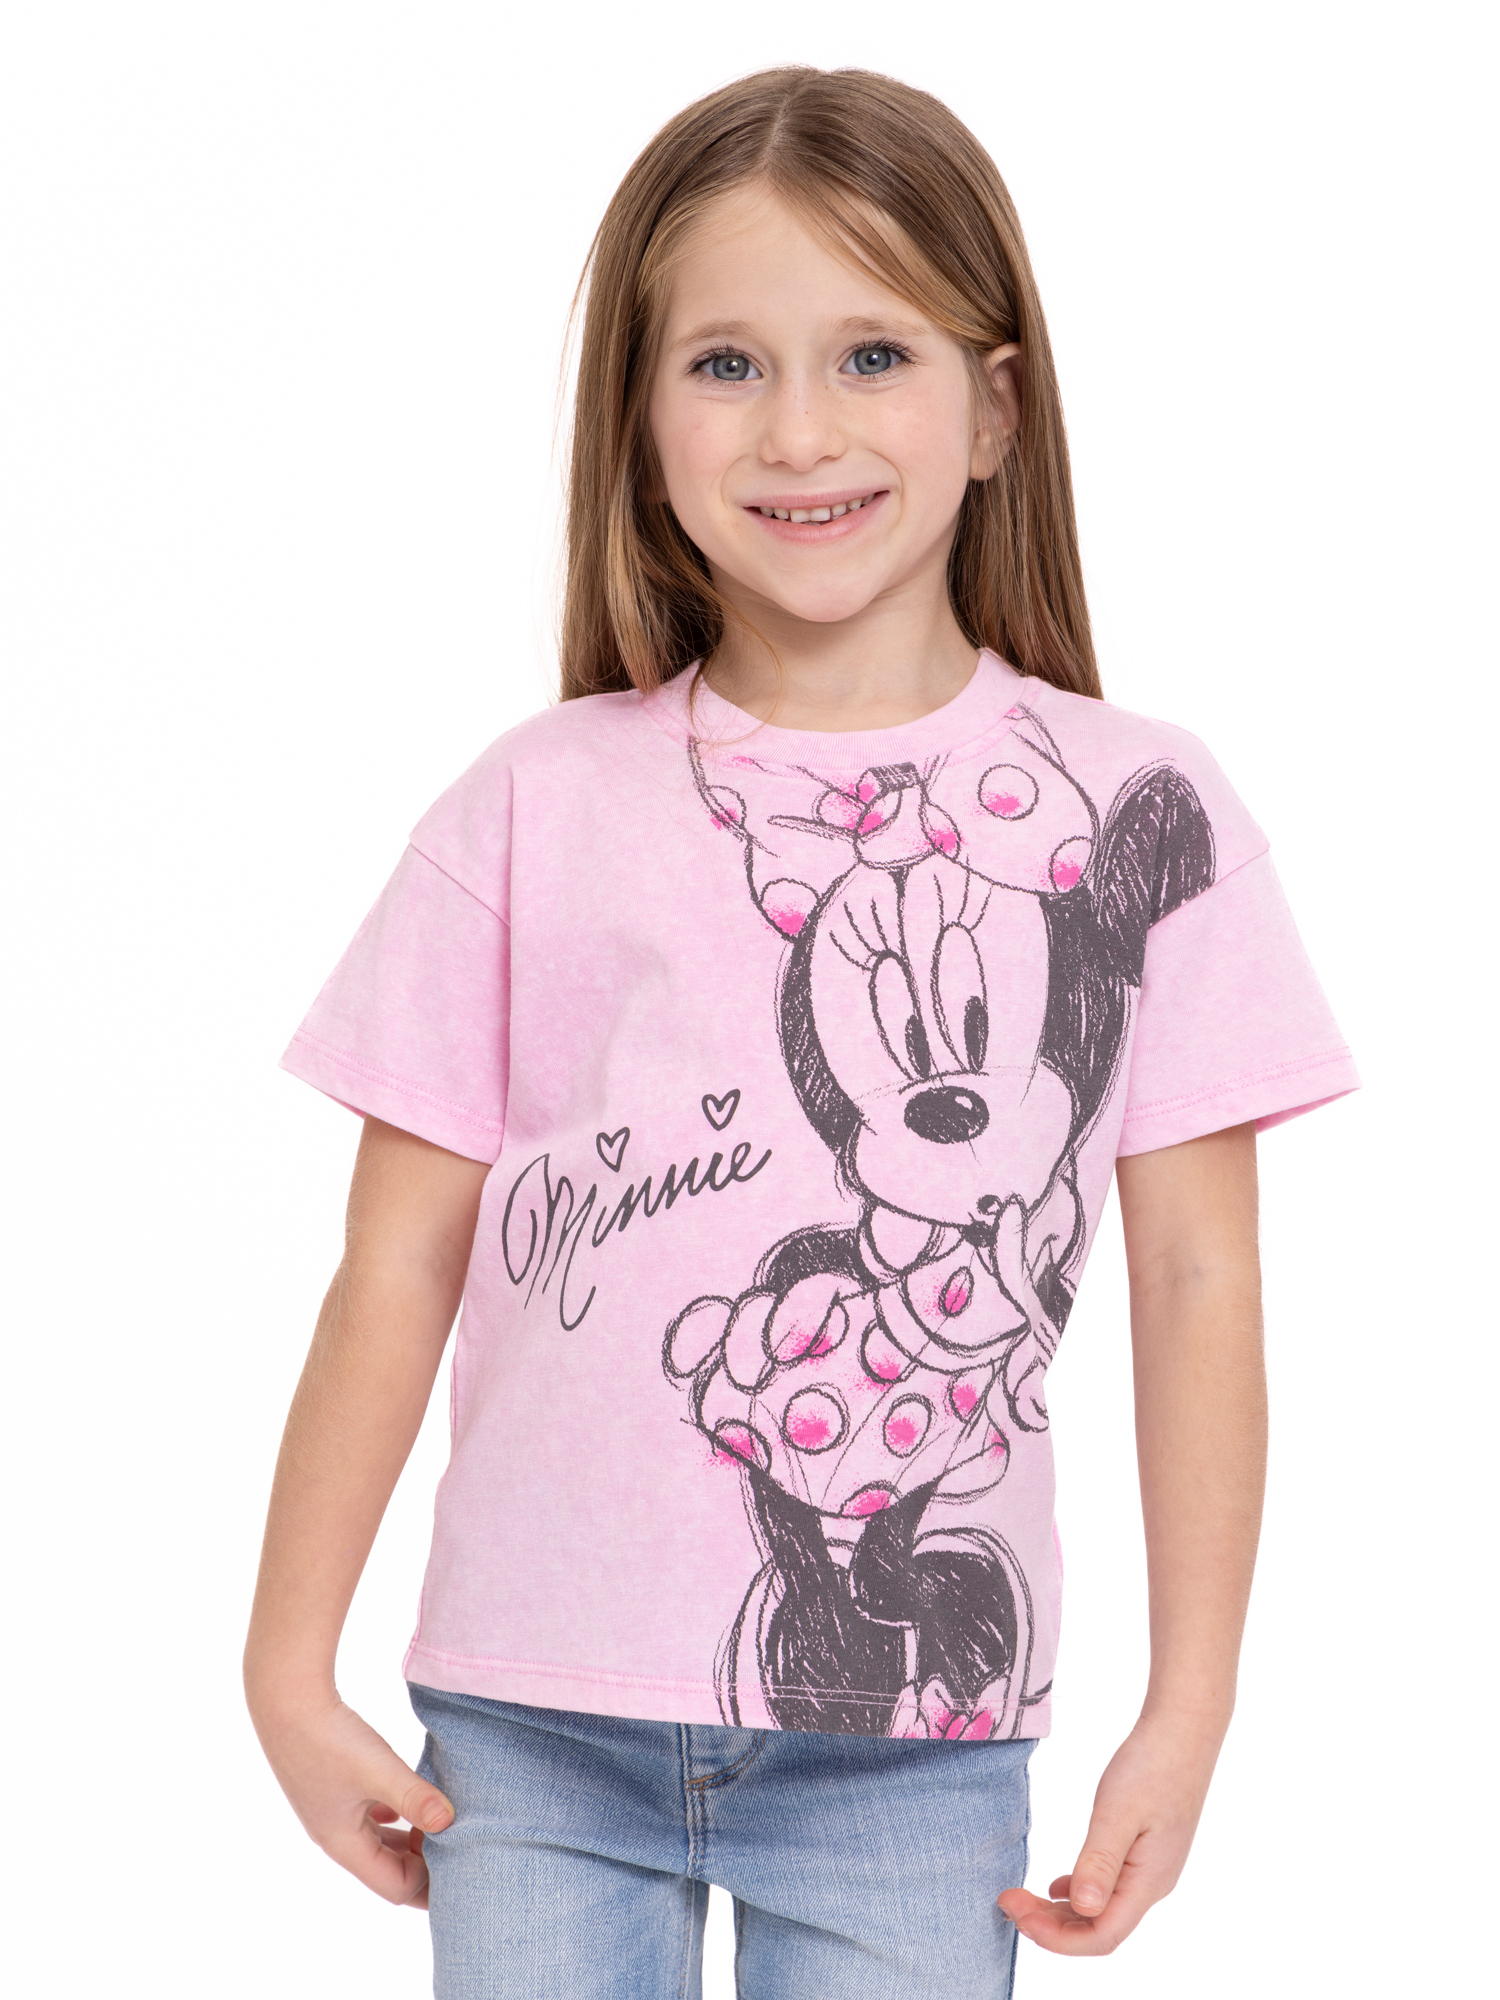 Minnie Mouse Toddler Girls Short Sleeve Crewneck T-Shirt, Sizes 12M-5T - image 1 of 7